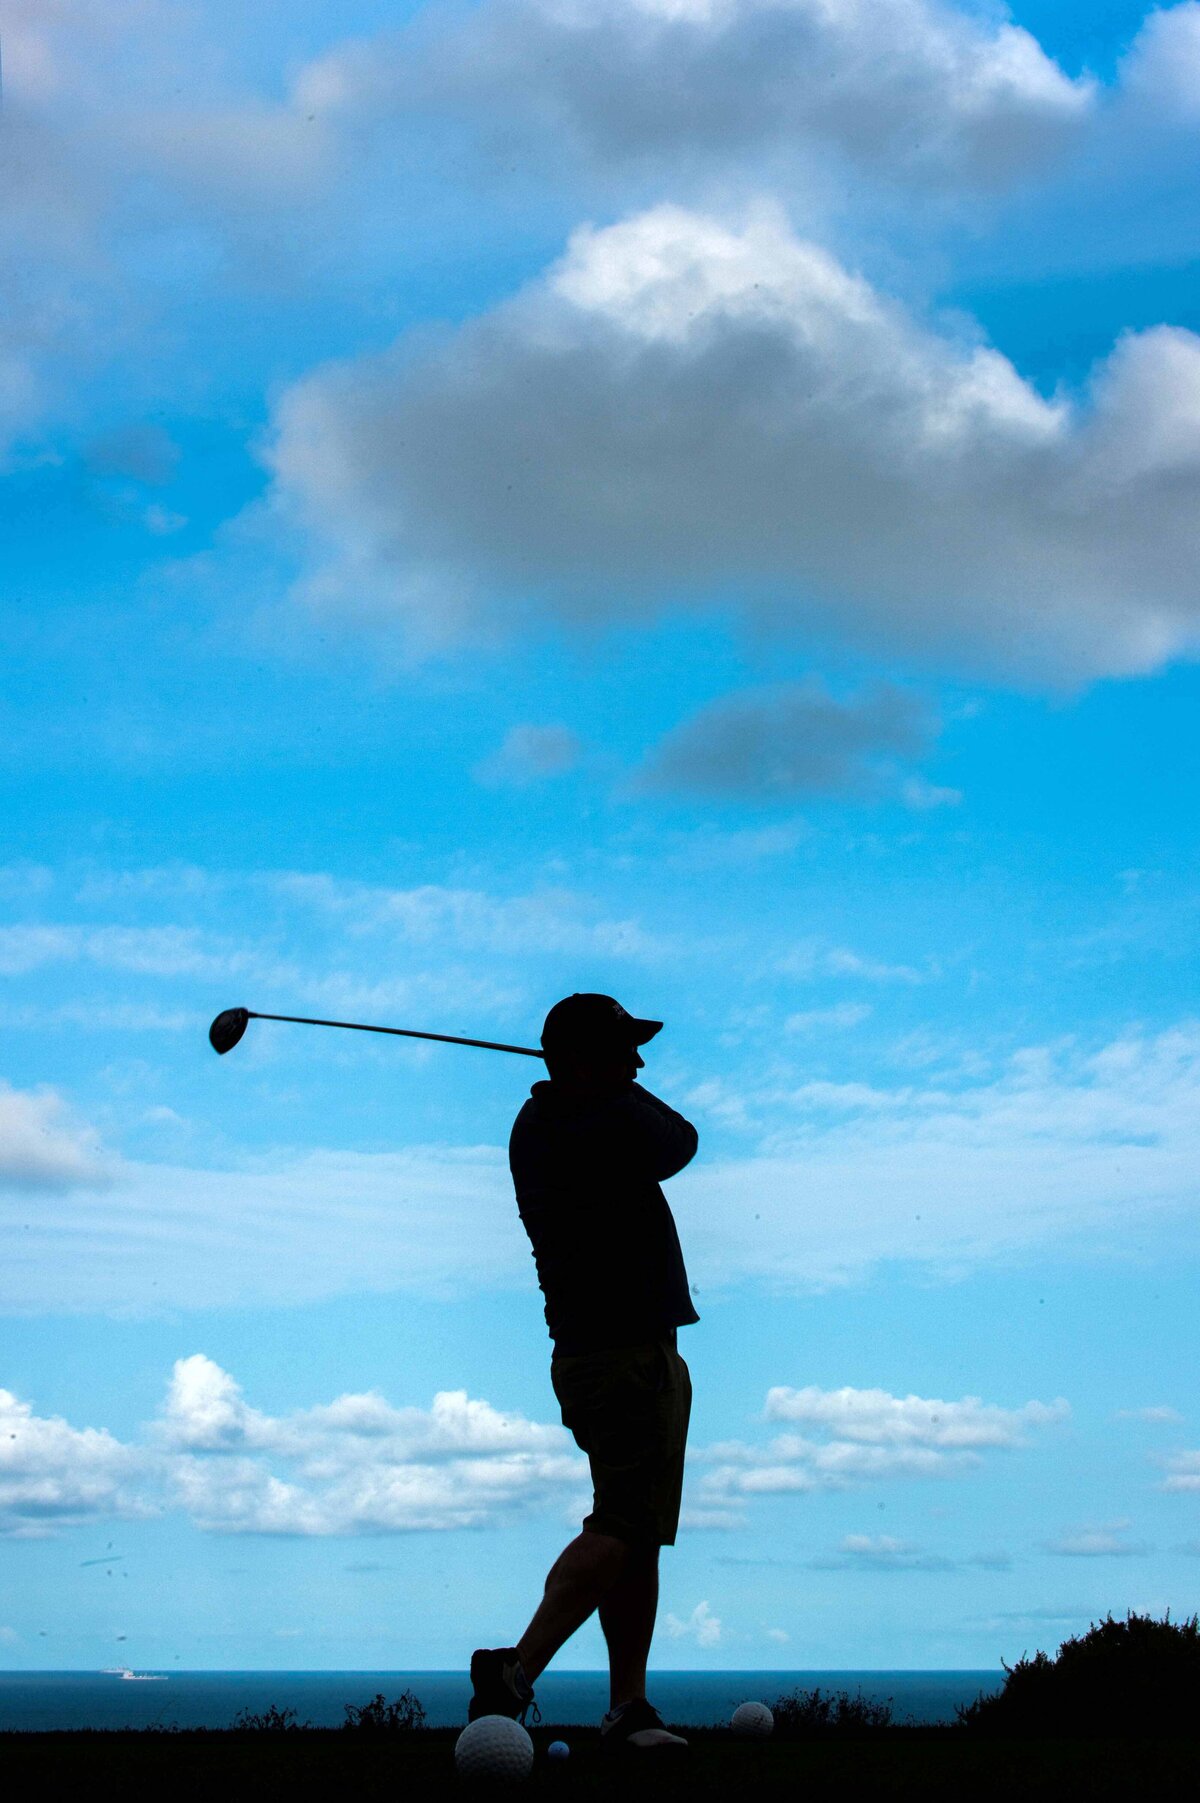 Golfer with club over shoulder silhouetted against sky with golf balls in foreground.